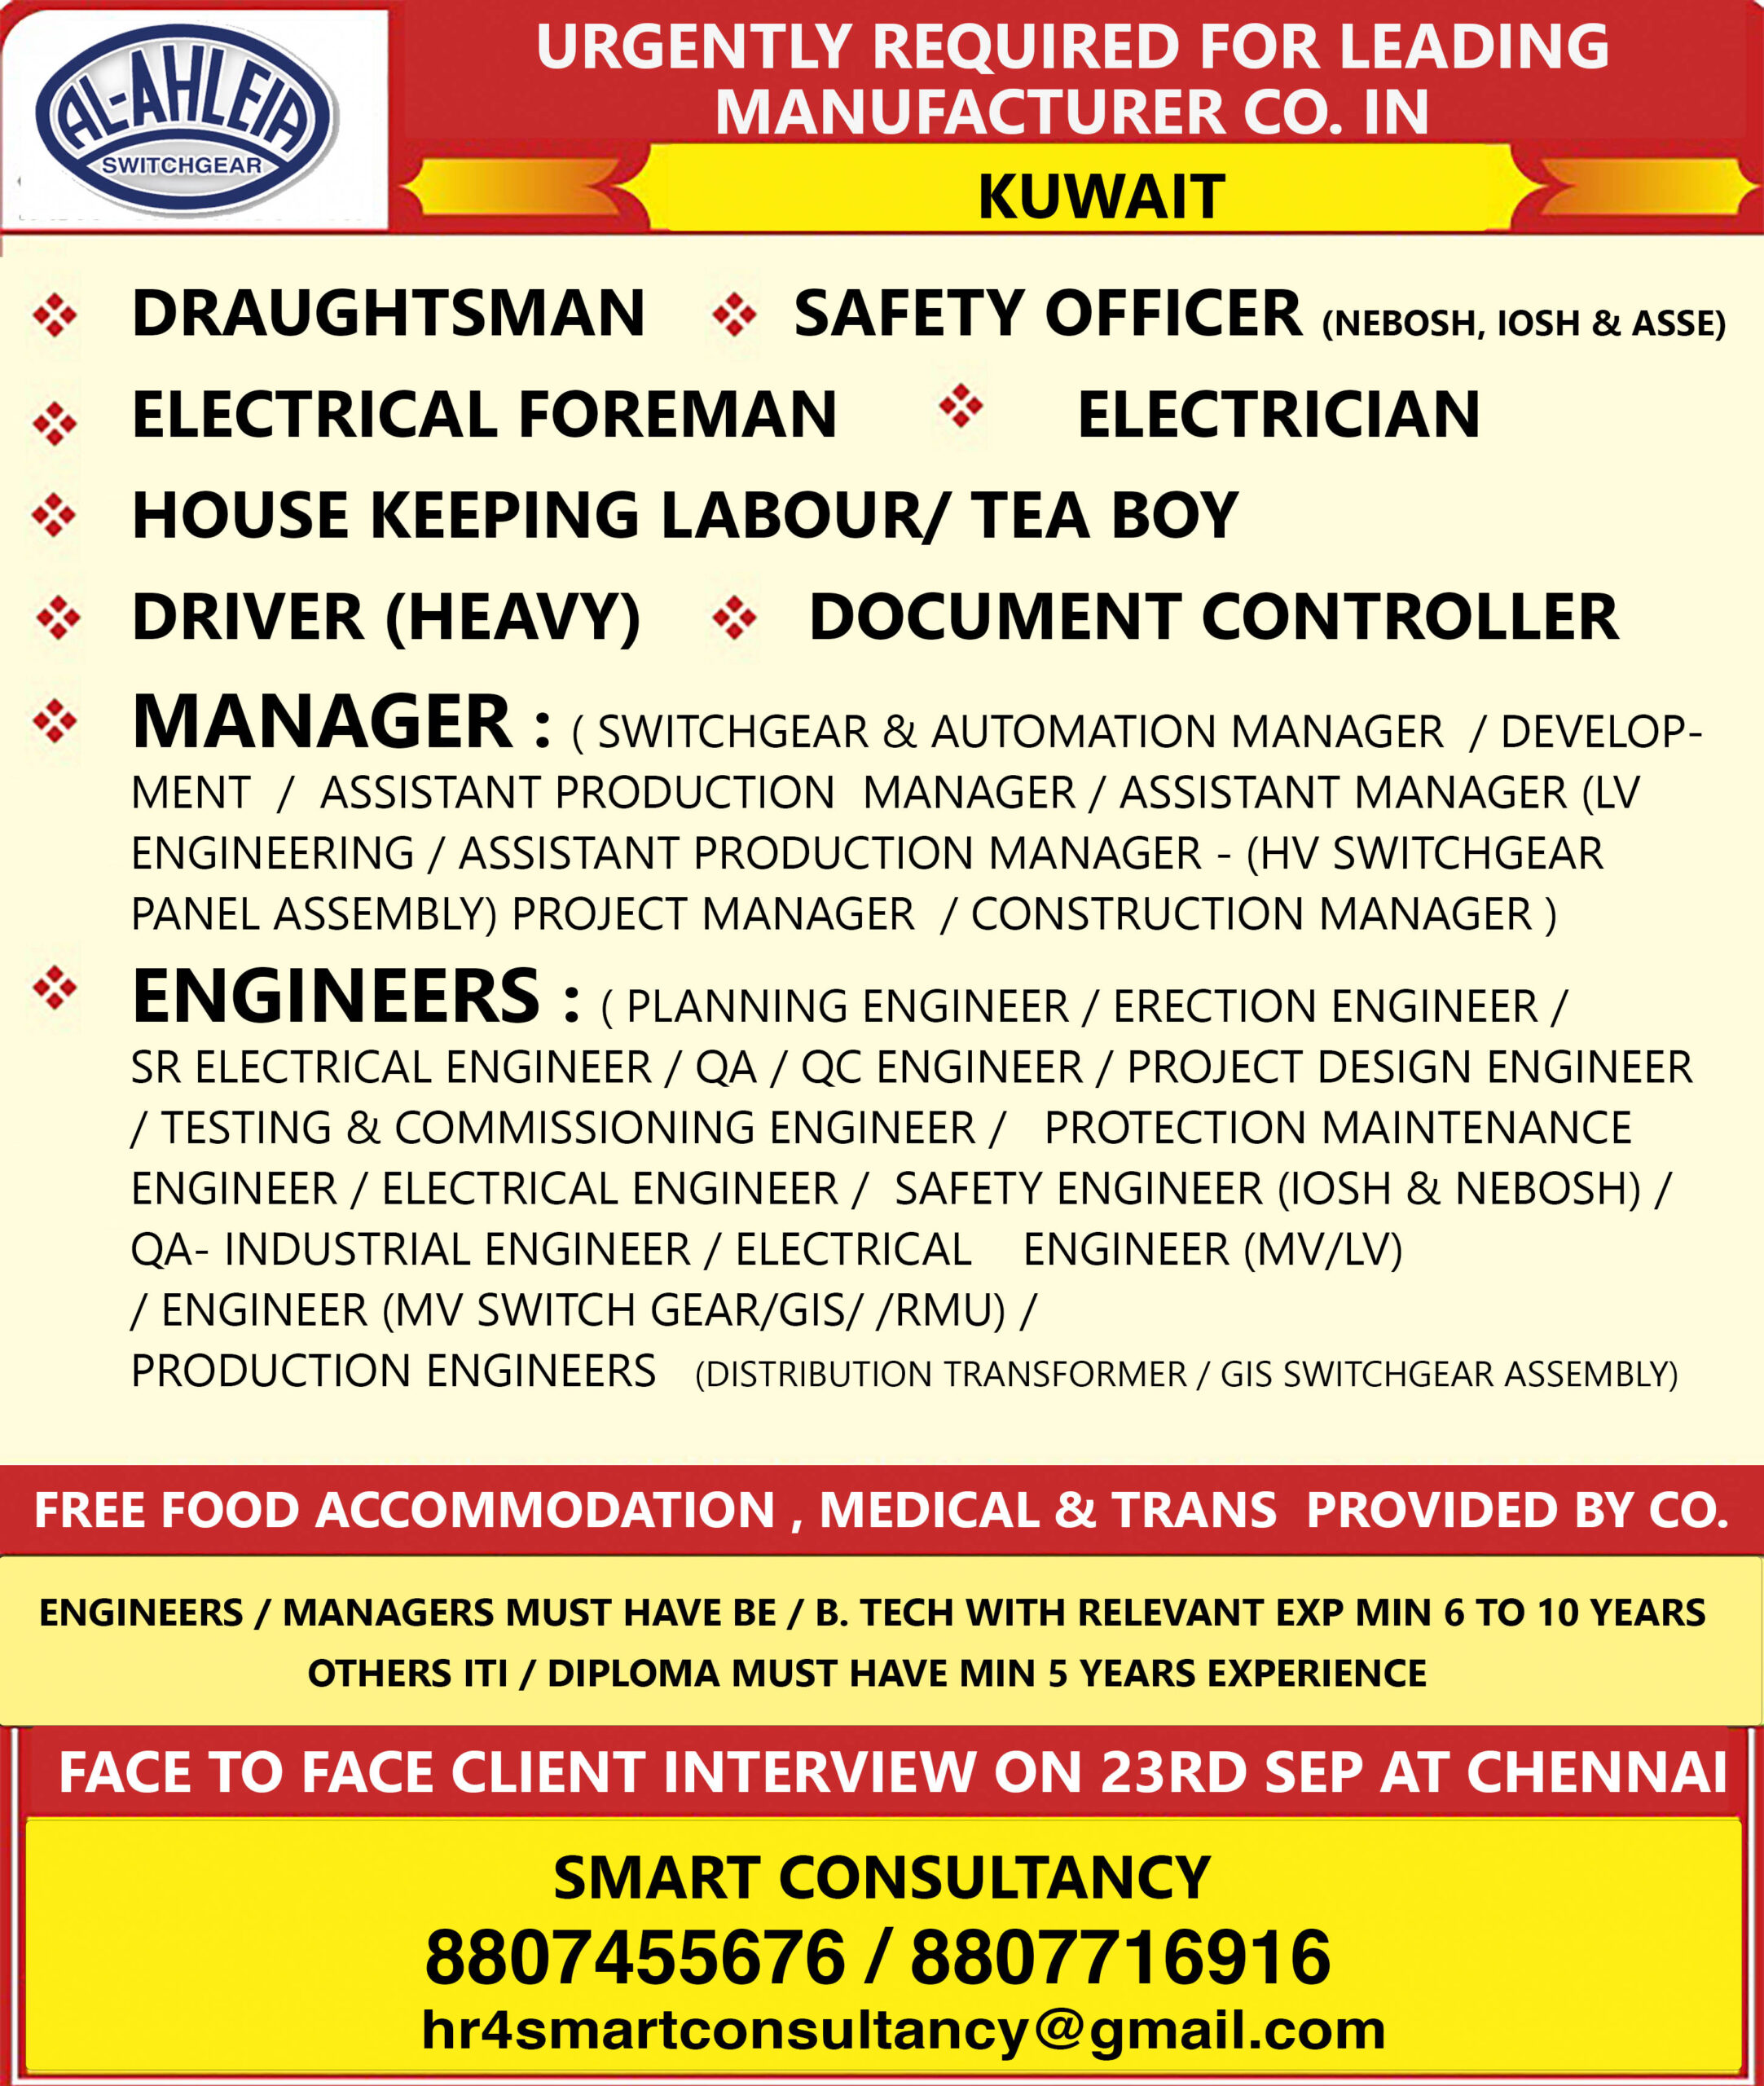 FACE TO FACE CLIENT INTERVIEW ON 23RD SEP AT CHENNAI